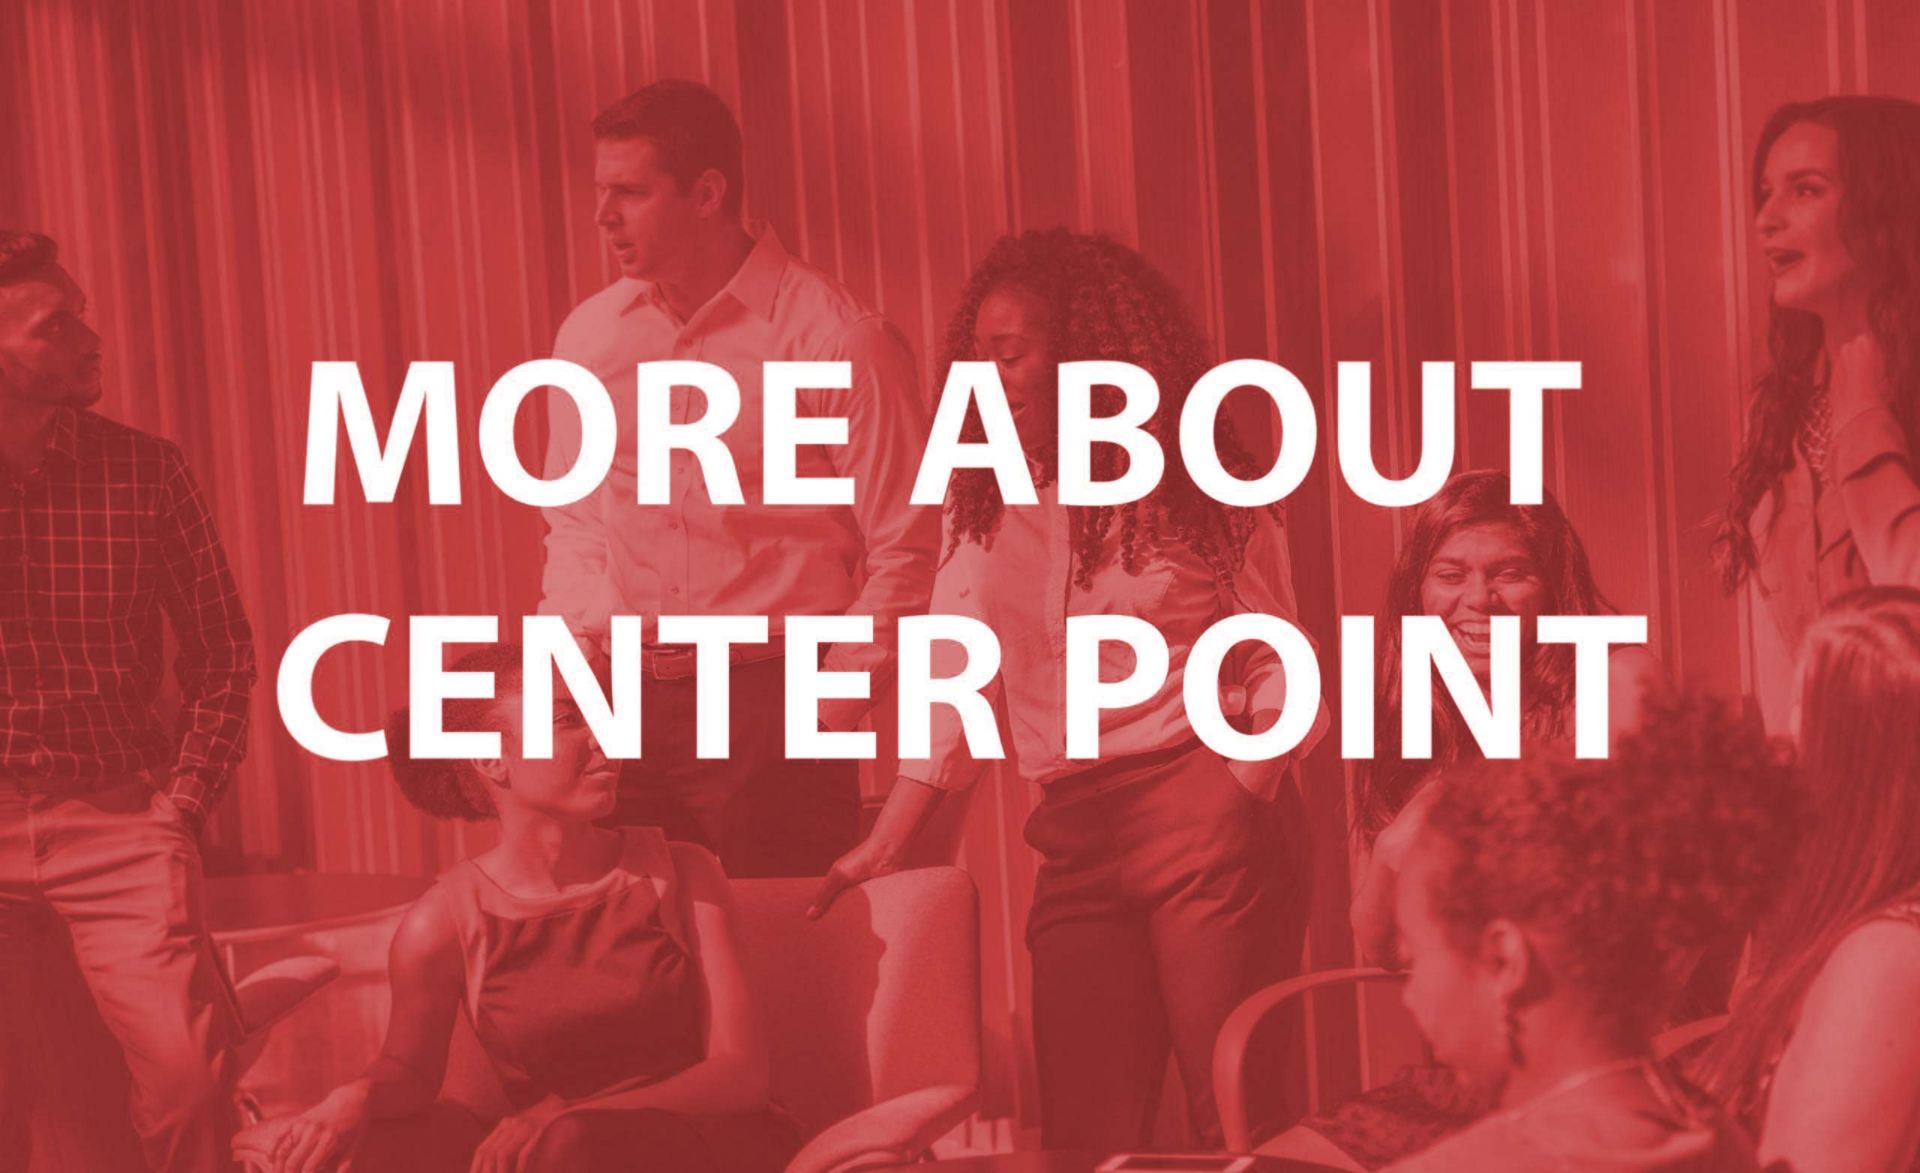 About the Center Point Symposium: The University of Texas at Dallas